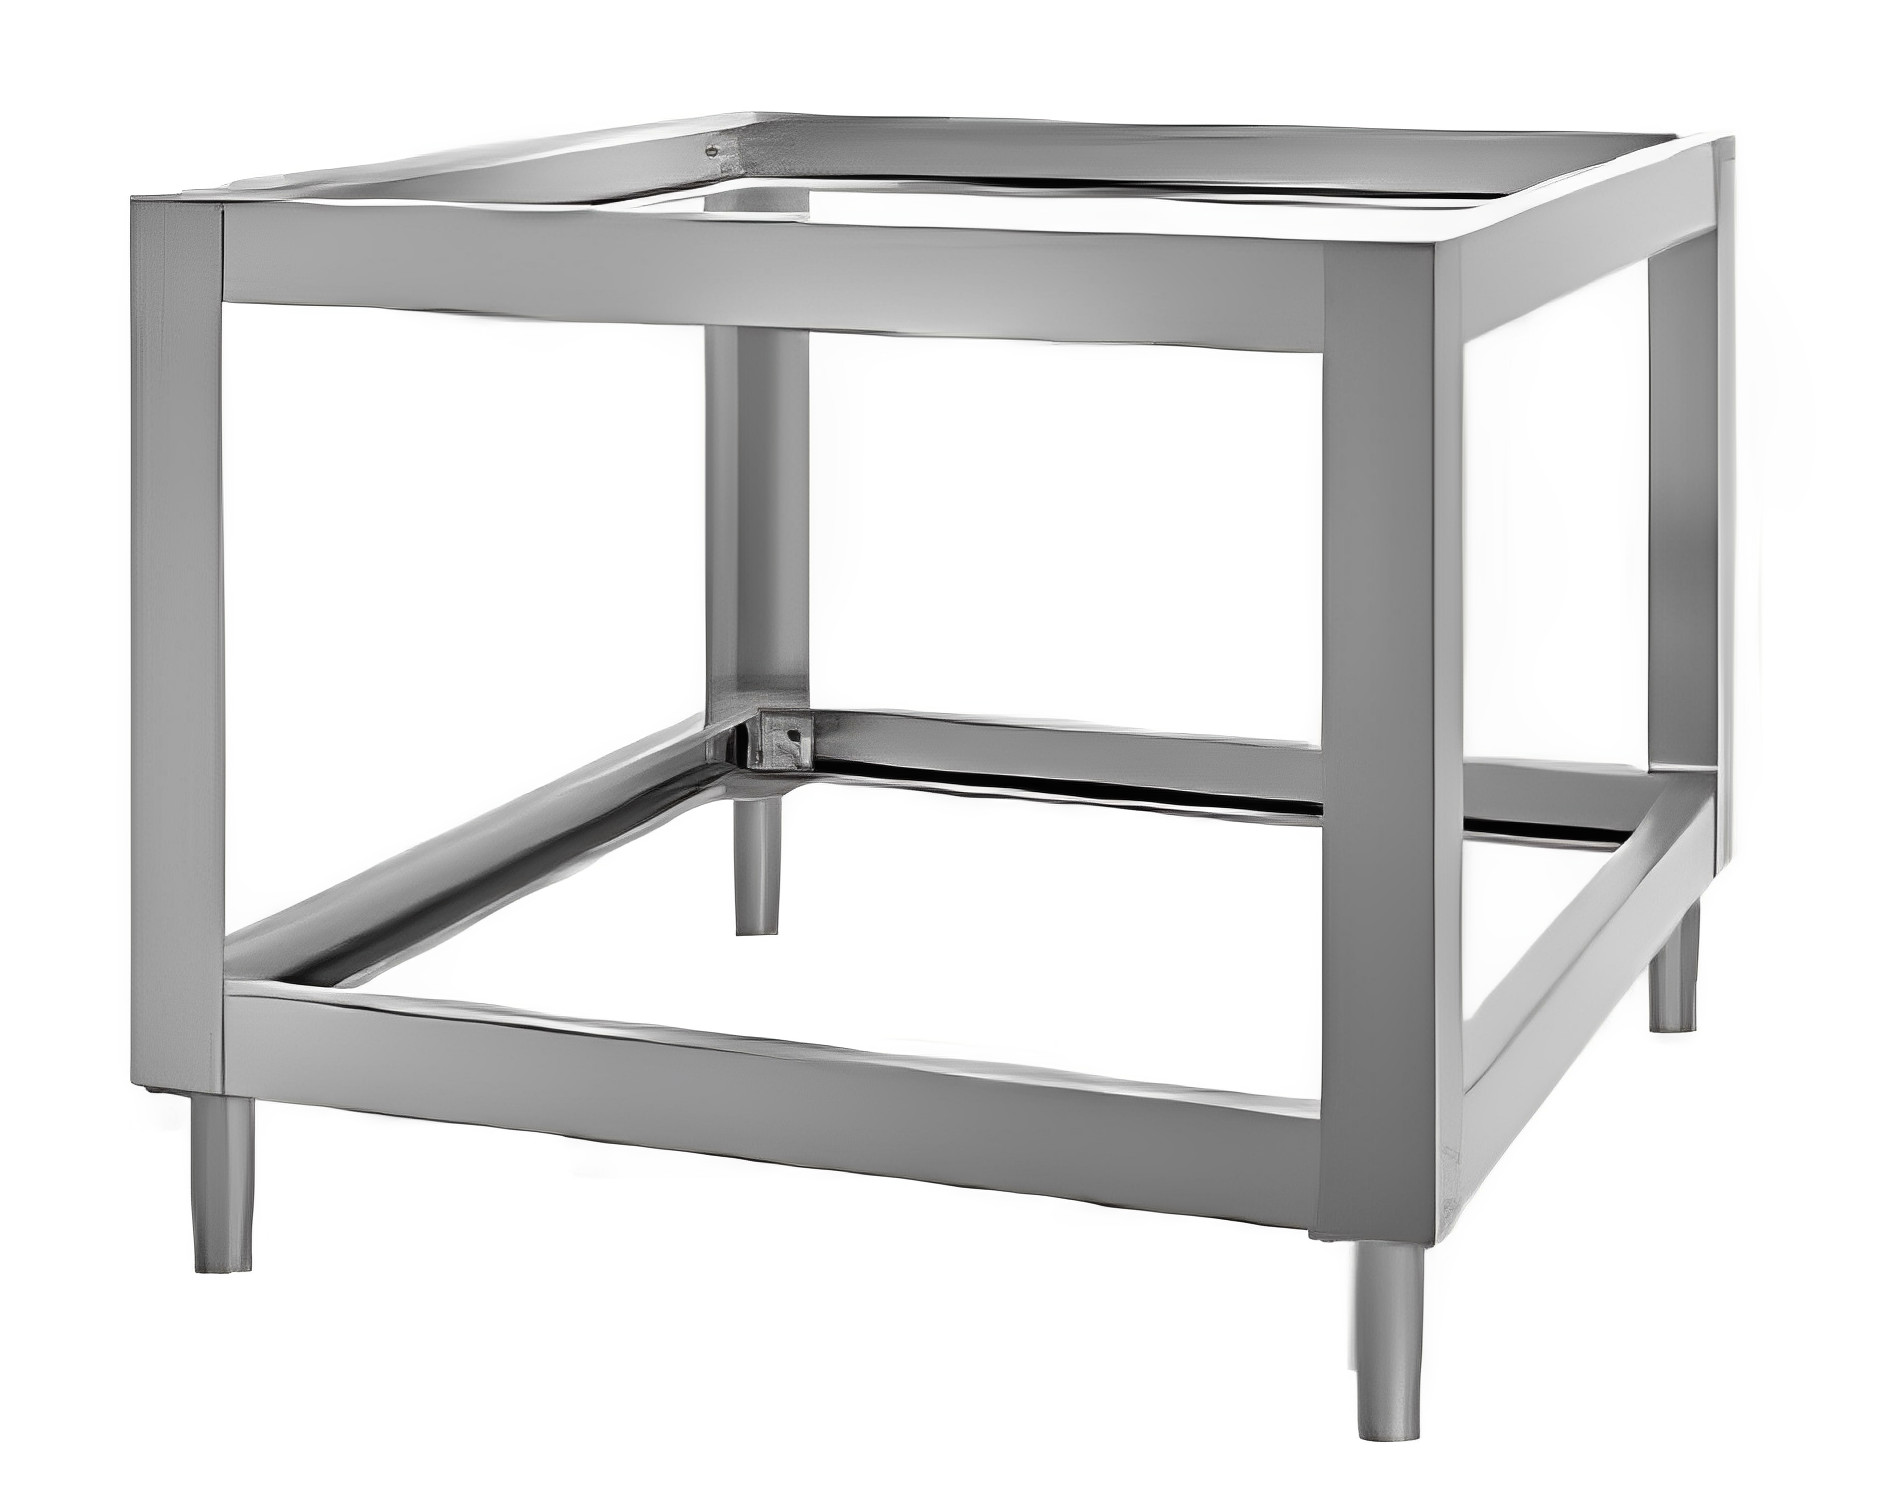 PIZZAGROUP Entry Max S6L Stands in stainless steel